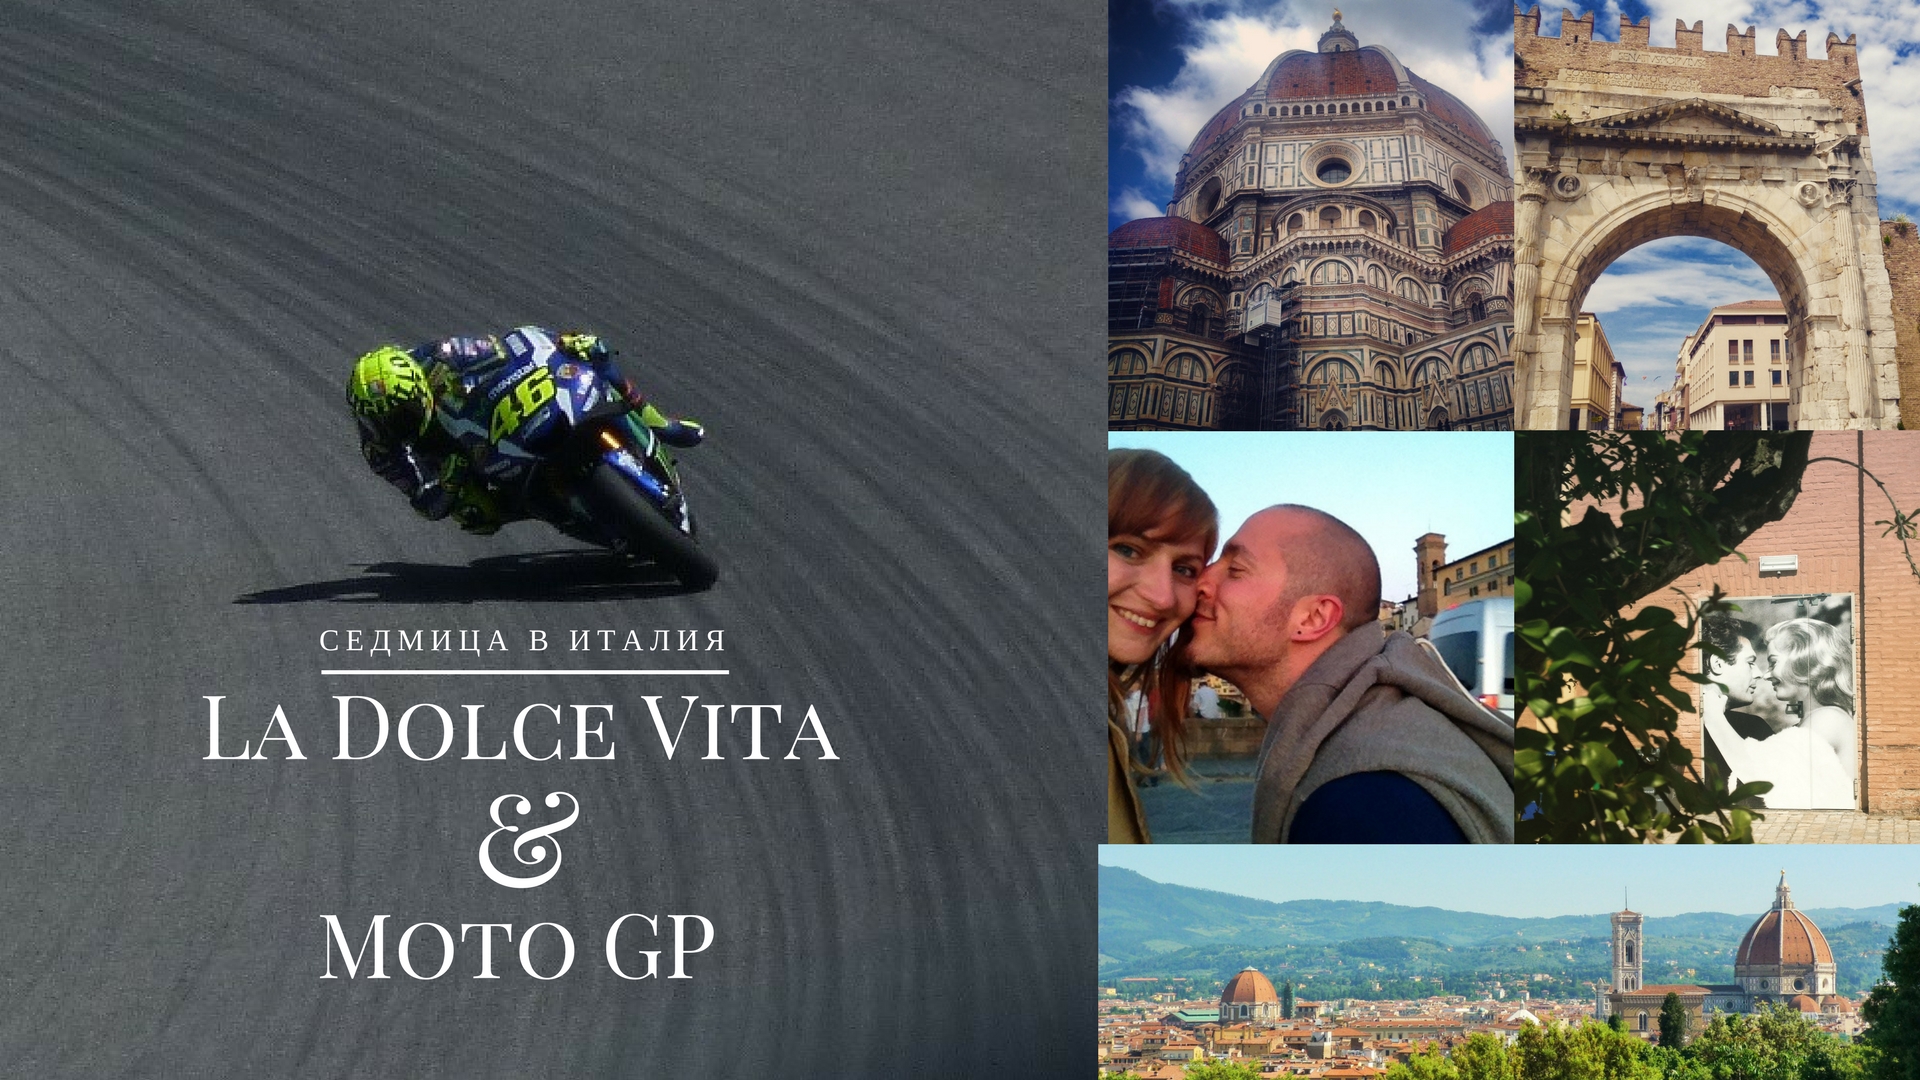 From Bologna to Florence a week of Italian Dolce Vita and Moto GP